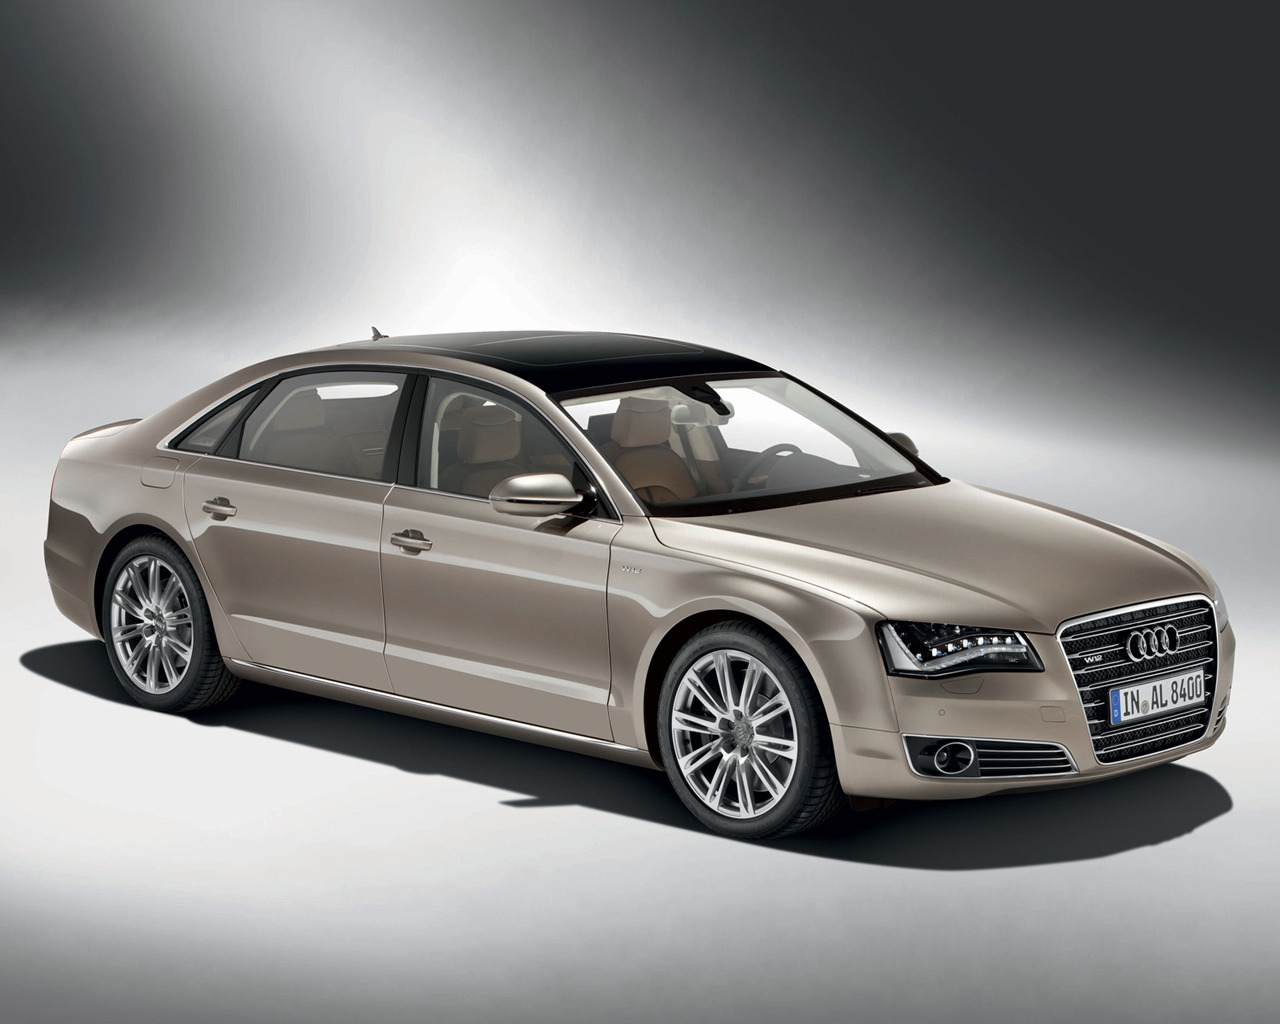 Audi A8 W12 2011 for 1280 x 1024 resolution